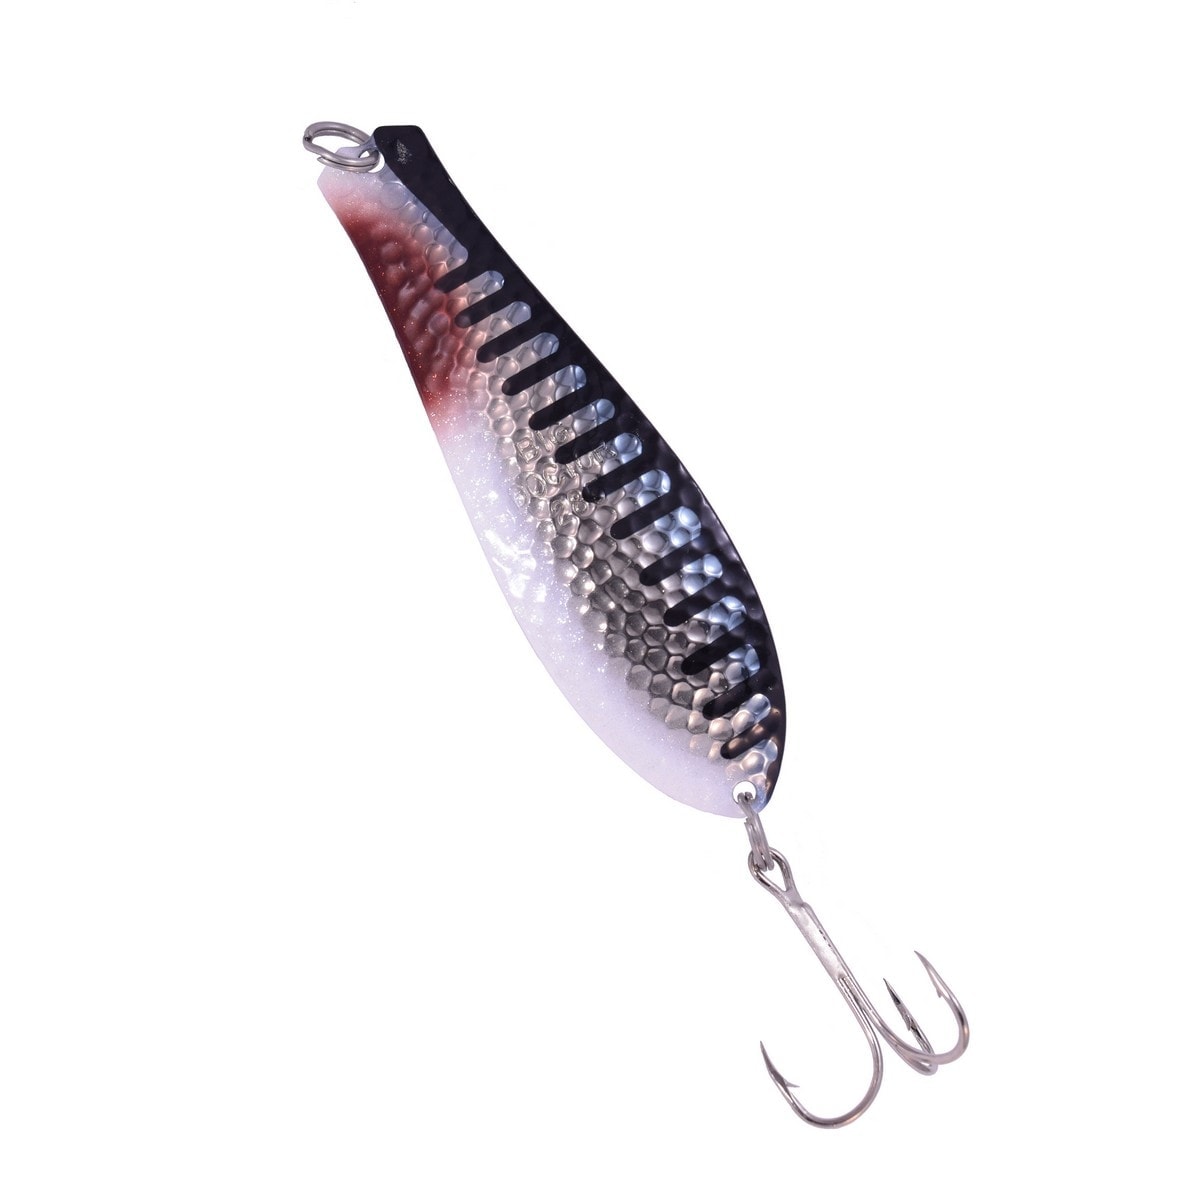 Doctor Spoon in (45) Pikey - Yellow Bird Fishing Products